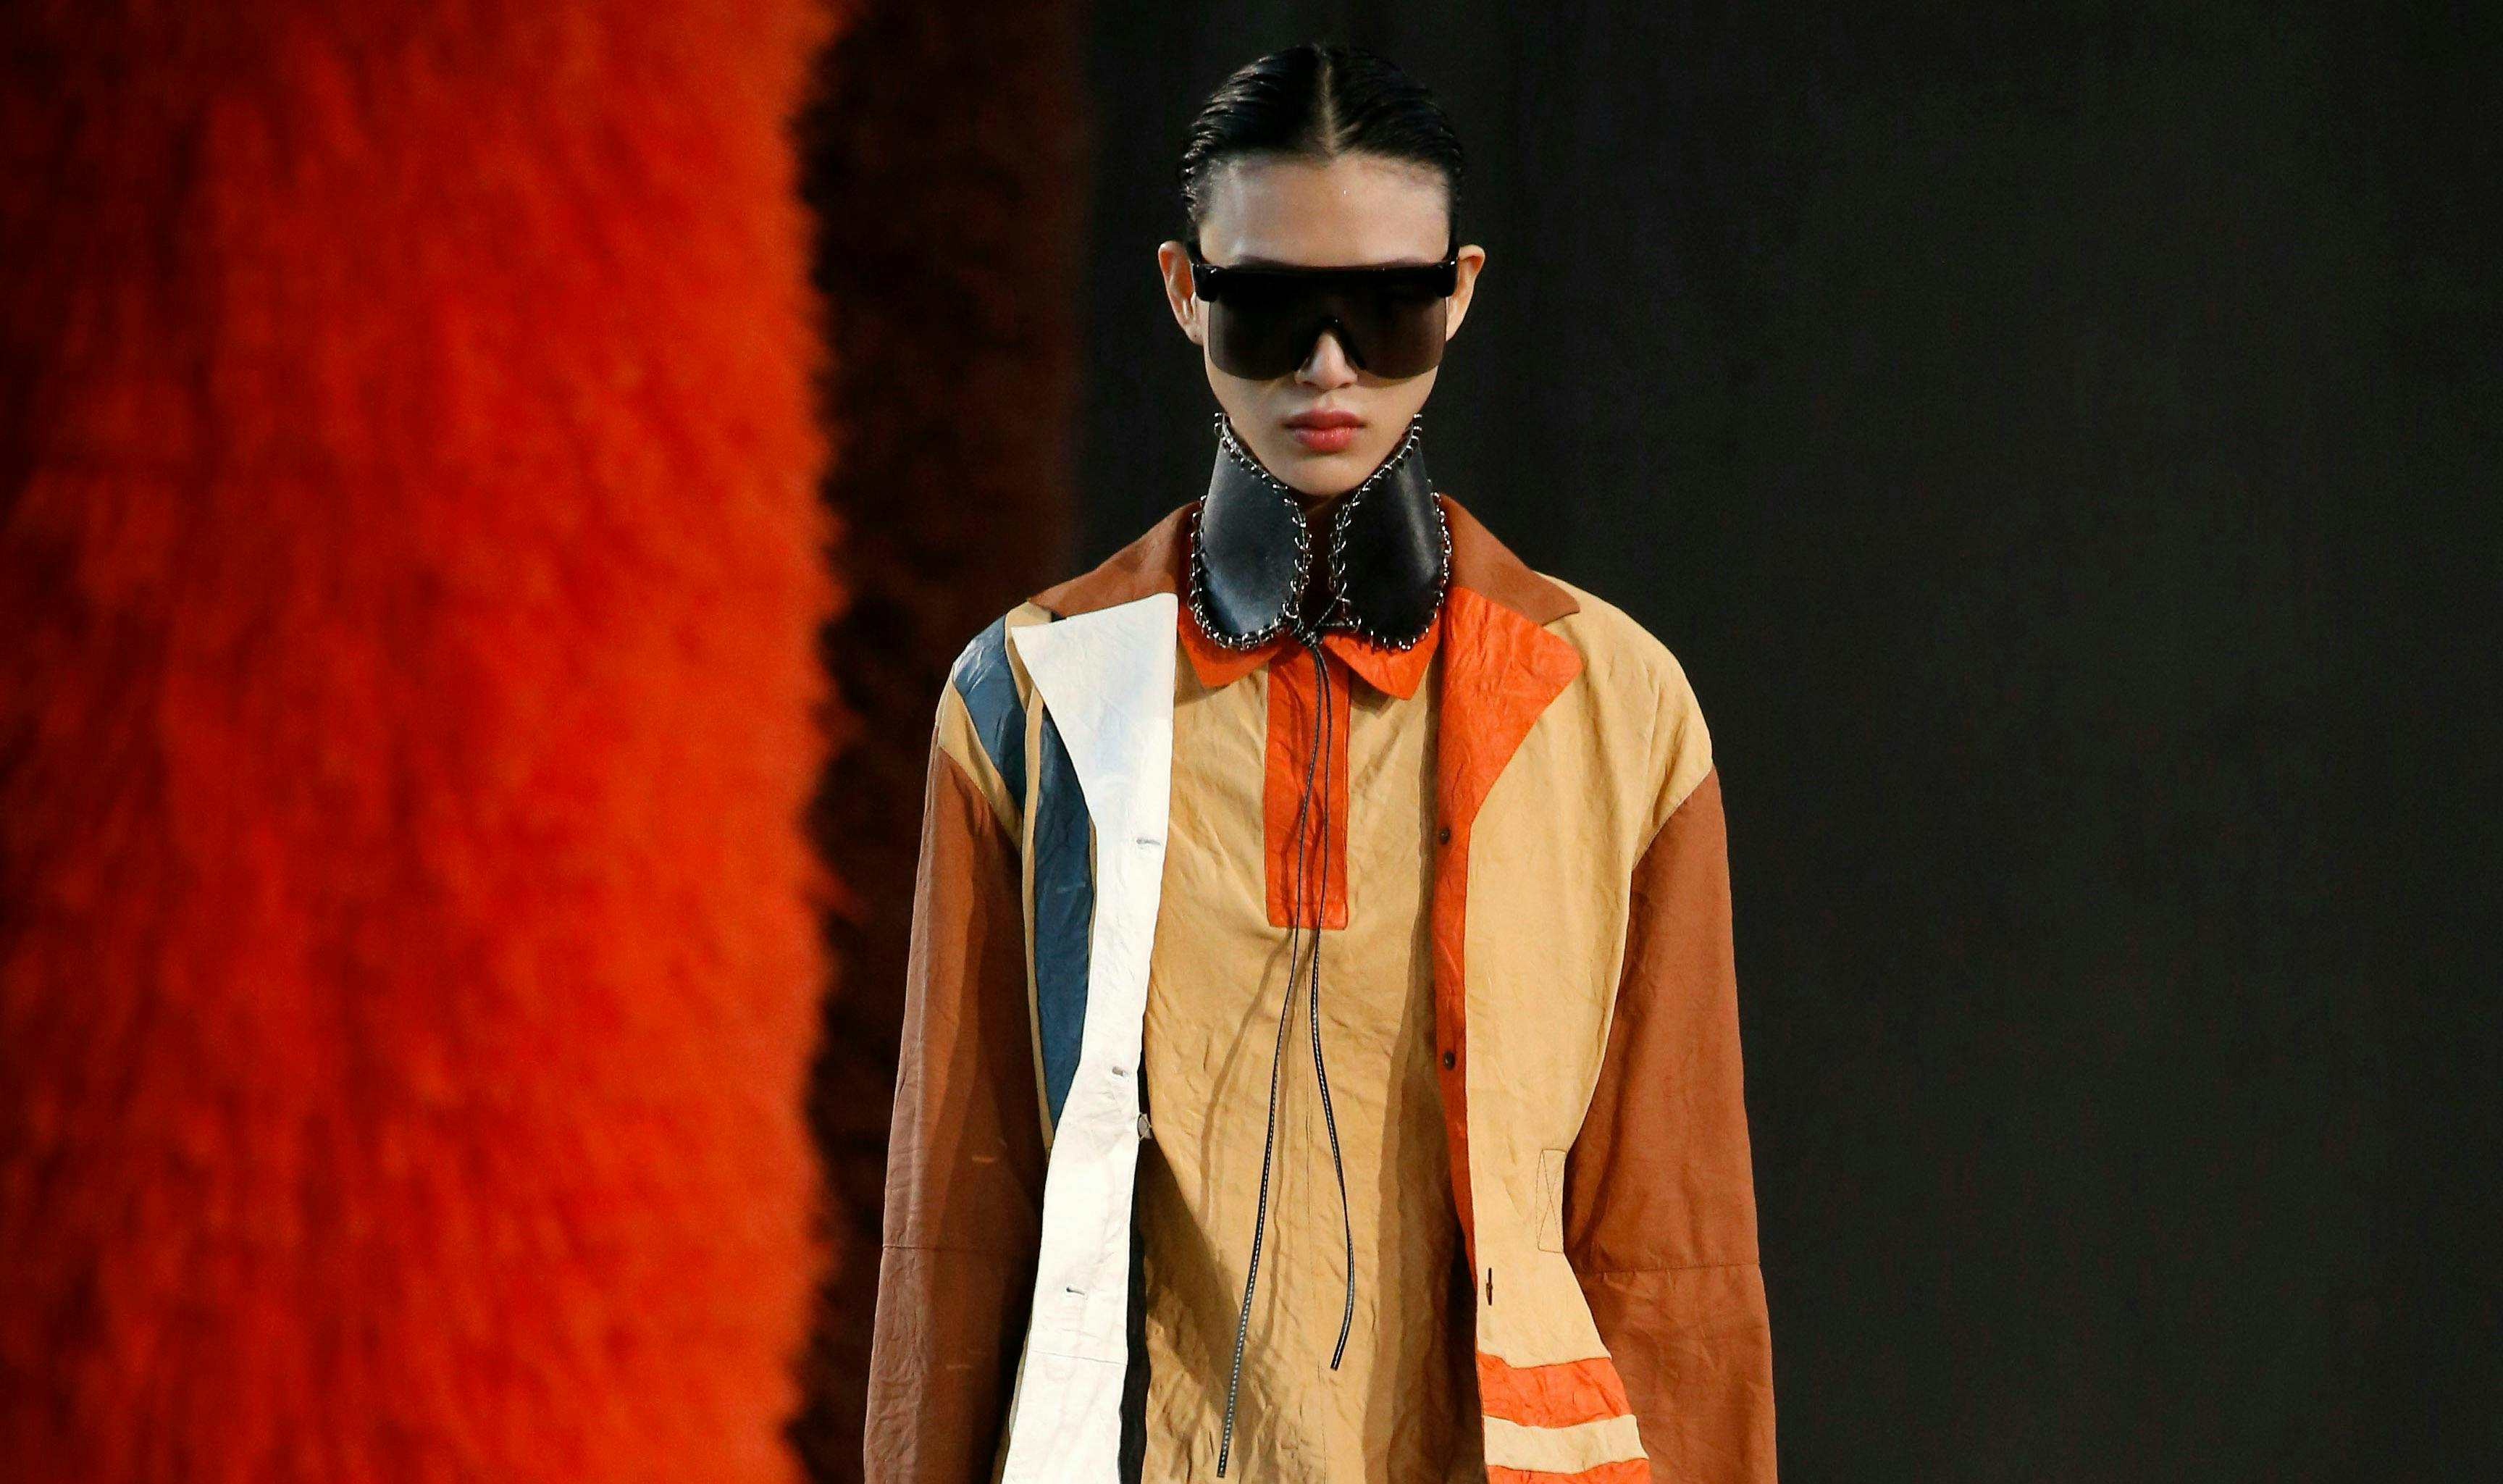 loewe ready to wear spring summer 2019 _paris fashion week september 2018 clothing apparel person human fashion sunglasses accessories accessory sleeve